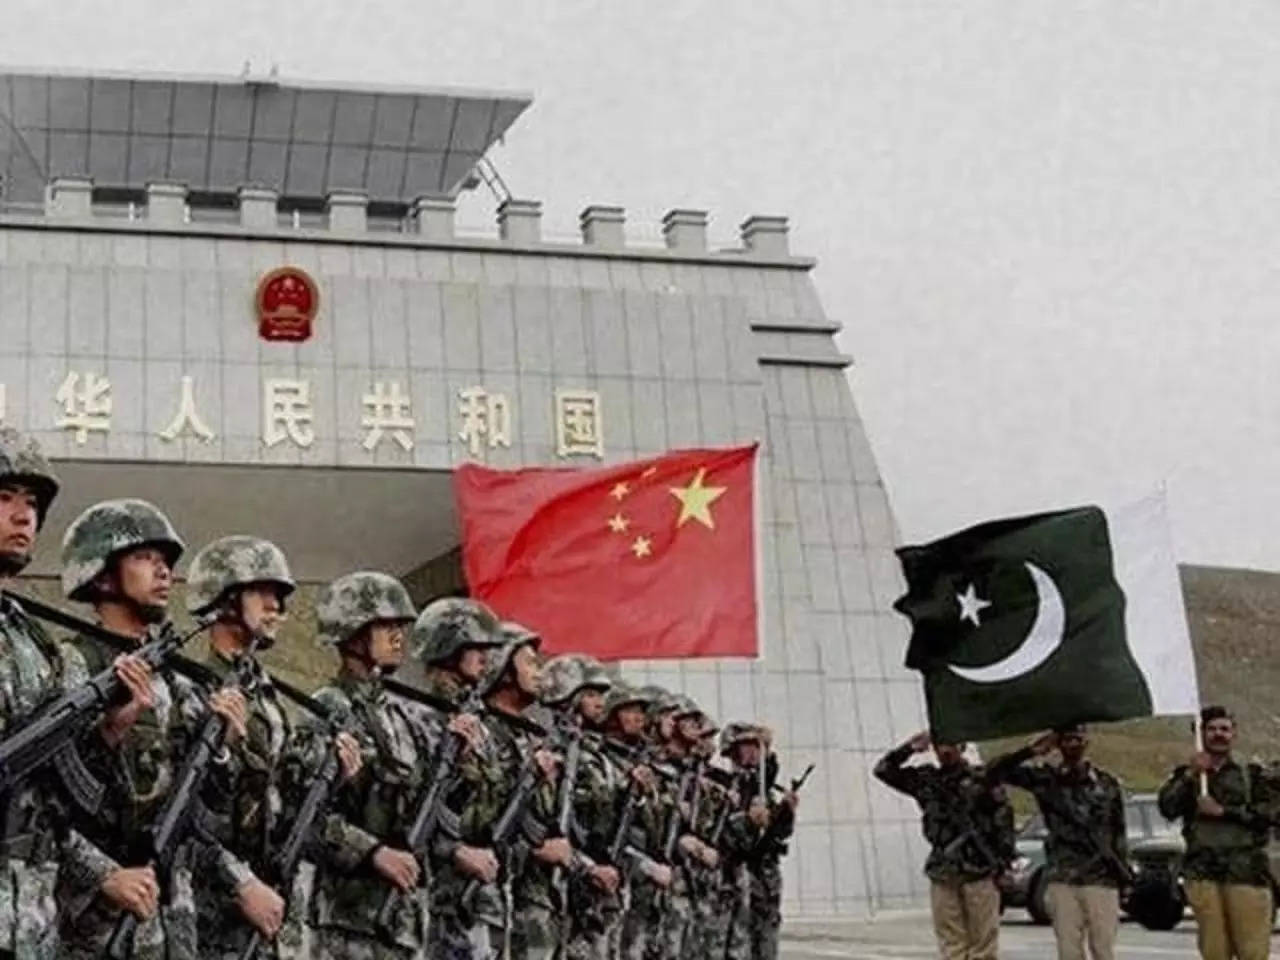 Pakistan and China welcome any third nation joining CPEC for beneficial cooperation